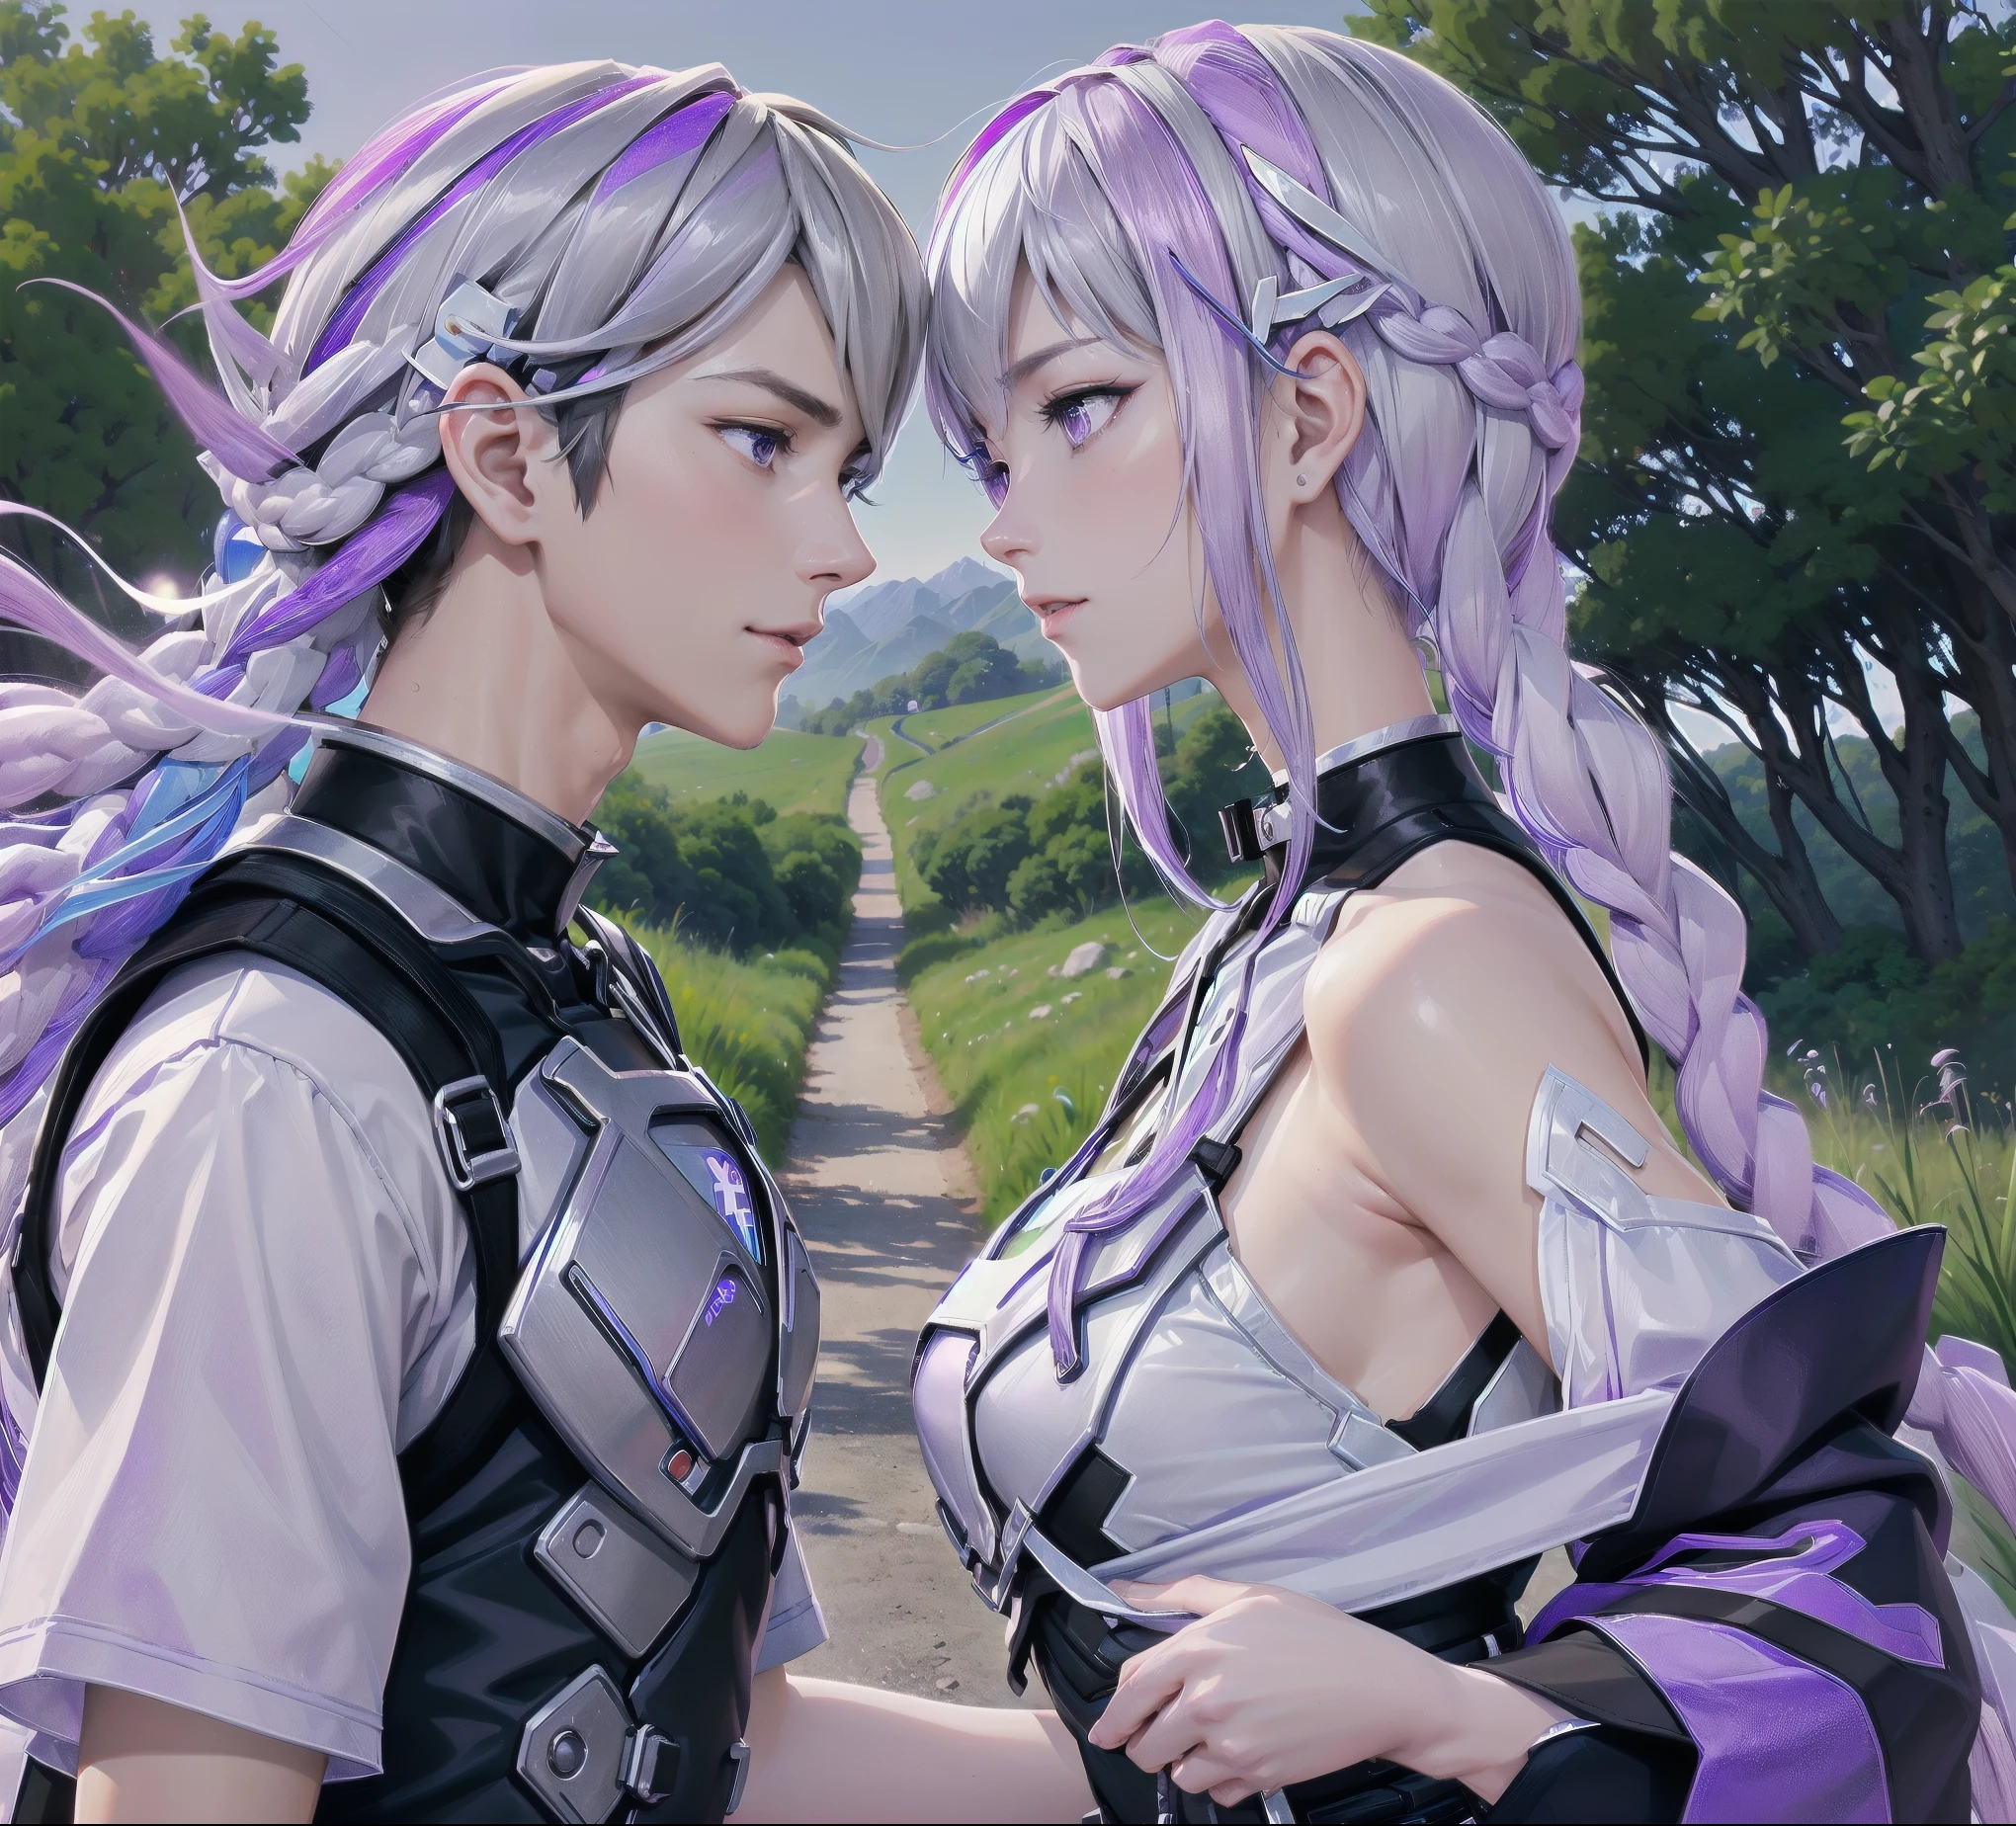 A couple(1 male, 1 woman with purple and white gradient double braids),Meet on a country road,Face to Face,Four eyesFace to face,Sunlight,Green fields and hills in the distance in the background,warmth,romantic,happiness